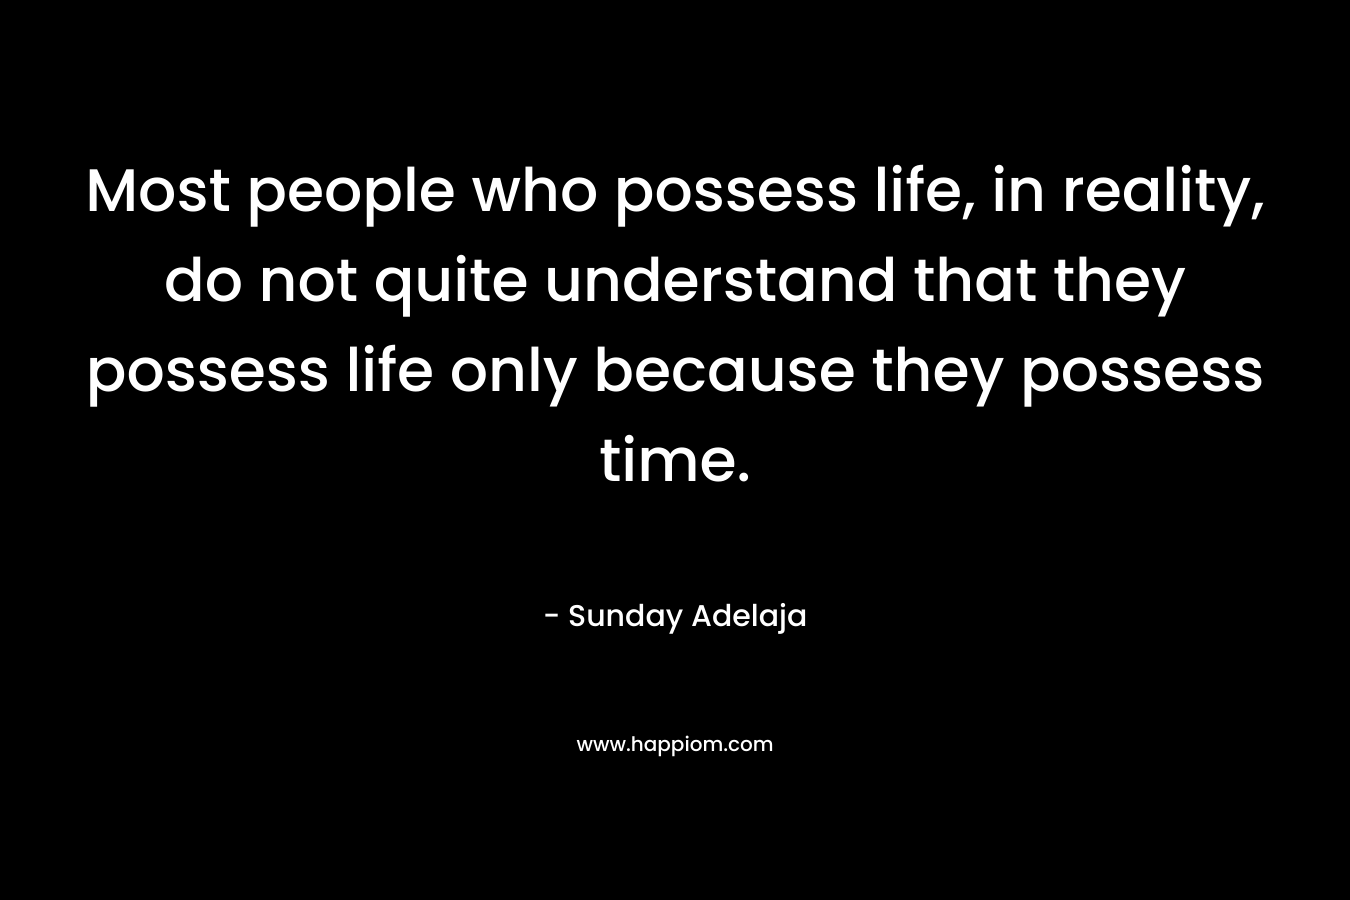 Most people who possess life, in reality, do not quite understand that they possess life only because they possess time.